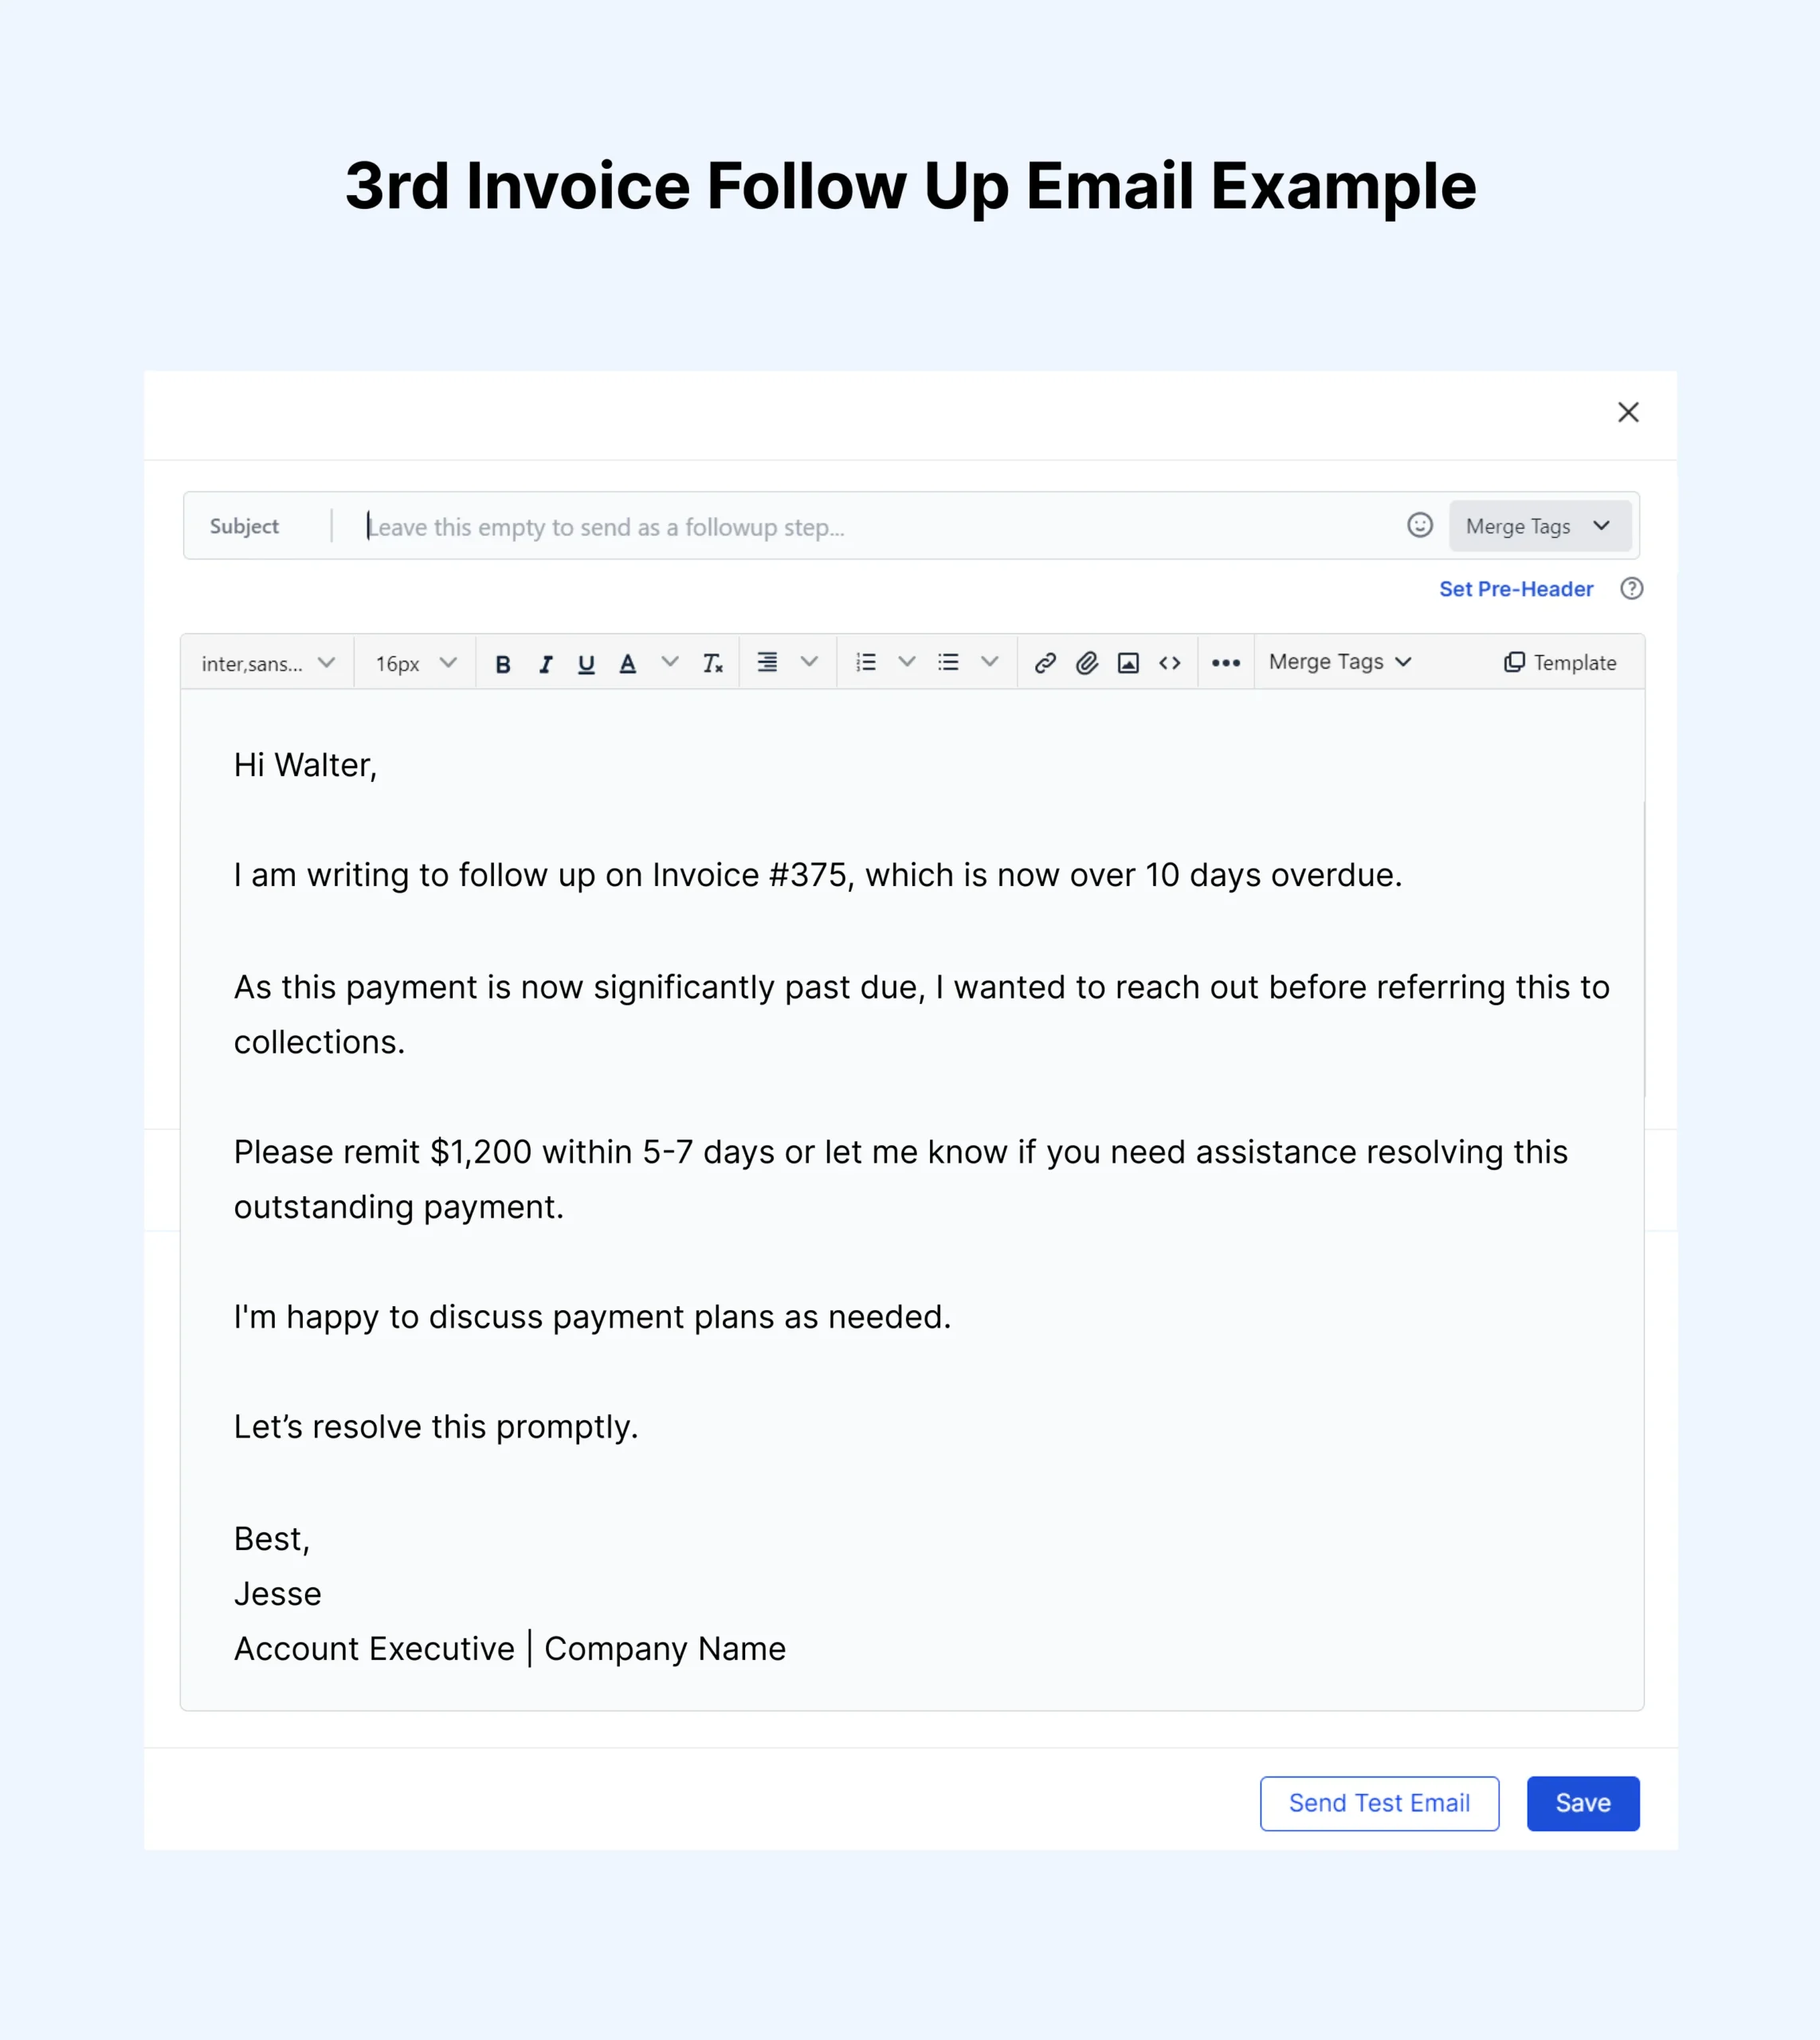 3rd Invoice Follow Up Email Example